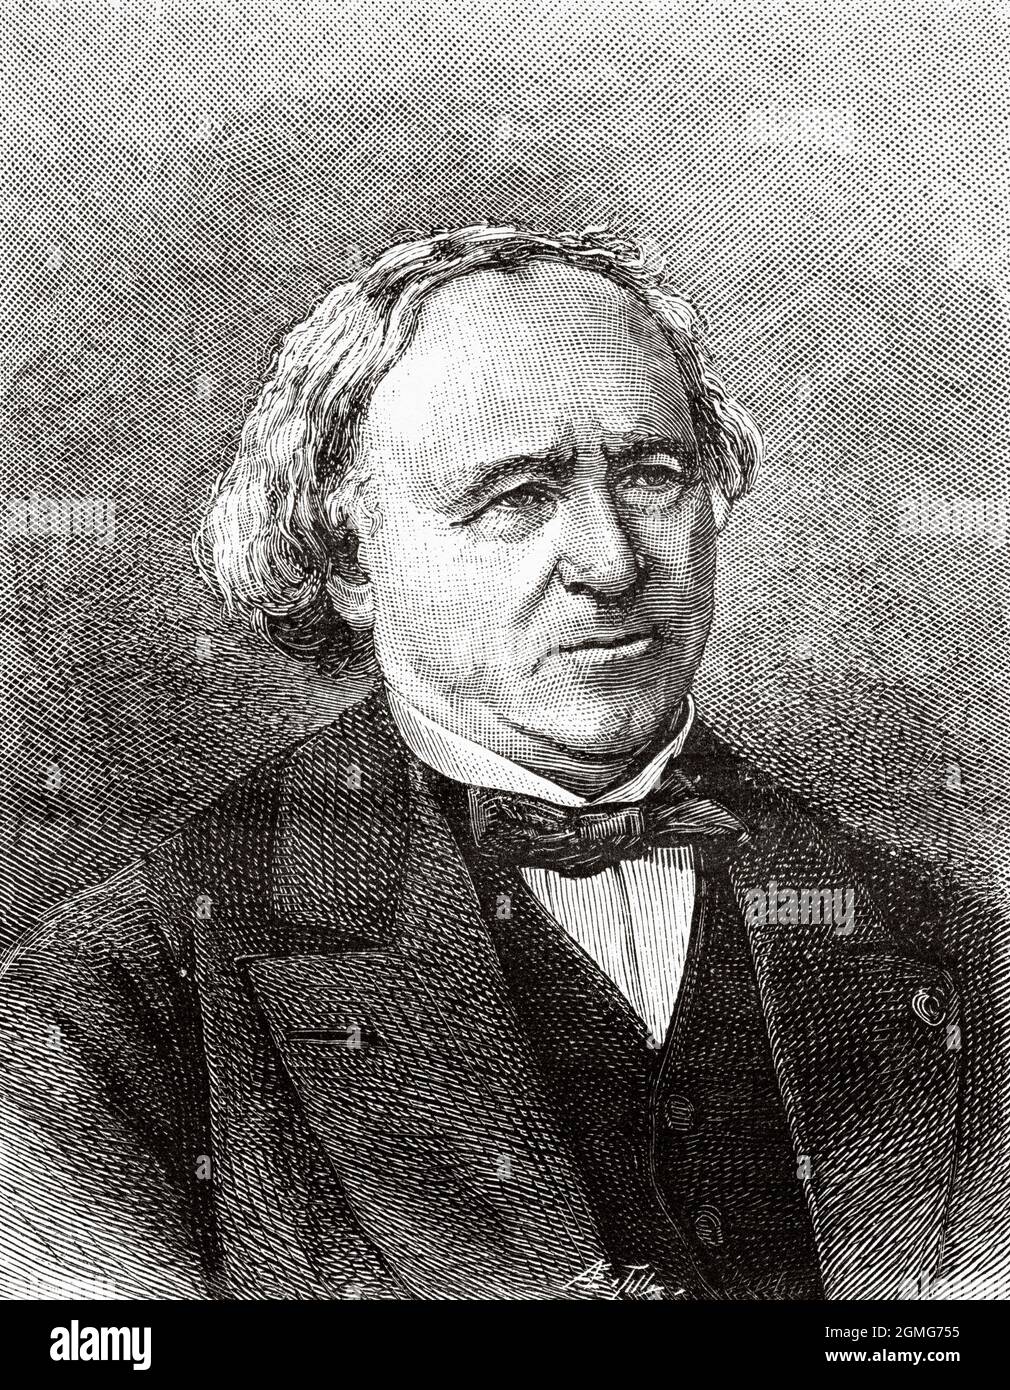 Portrait of Jean Baptiste André Dumas (1800-1884) was a French chemist, known for his works on organic analysis and synthesis and the determination of atomic weights. France, Europe. Old 19th century engraved illustration from La Nature 1883 Stock Photo